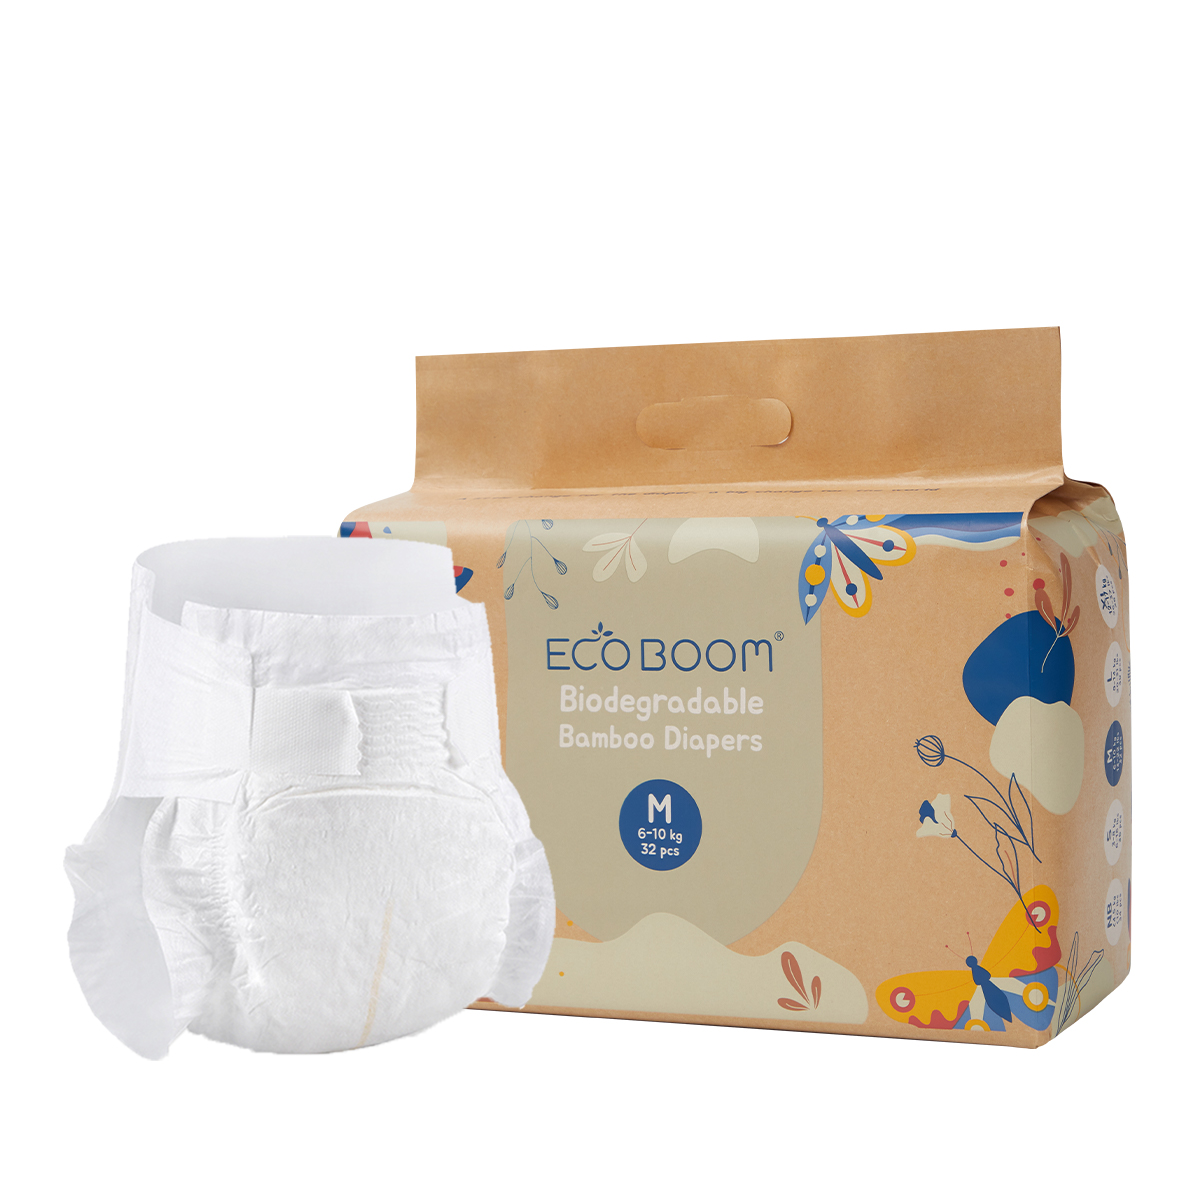 Join Eco Boom bamboo naturals diapers suppliers-2